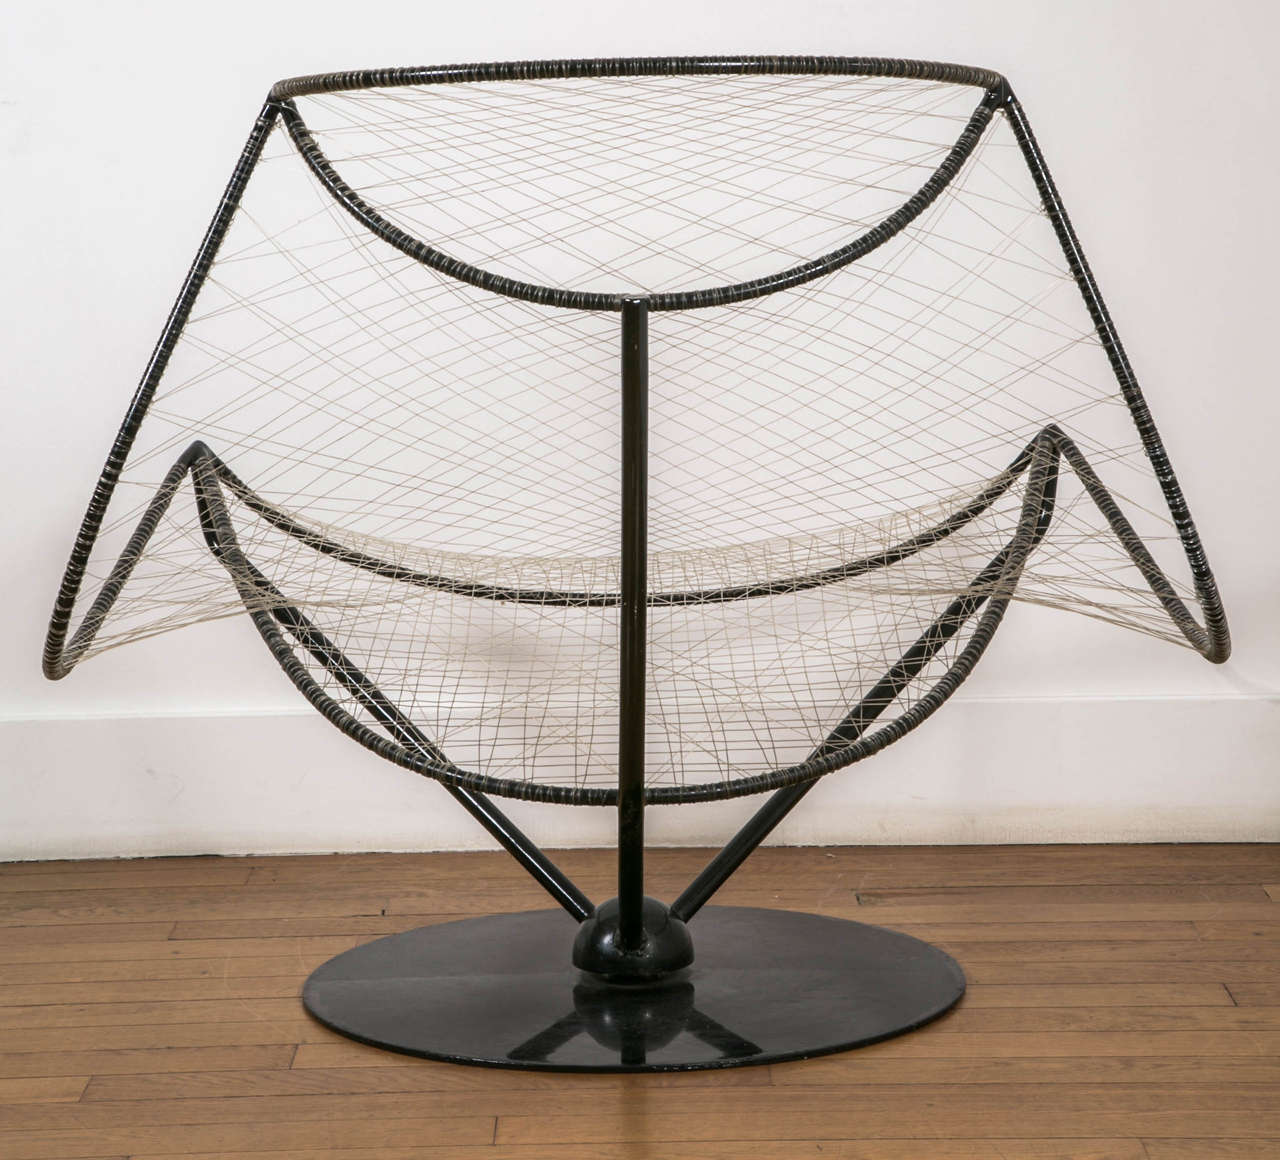 Lacquered String Chair by Conti Forlani and Grassi for Paoli, Designed in 1962